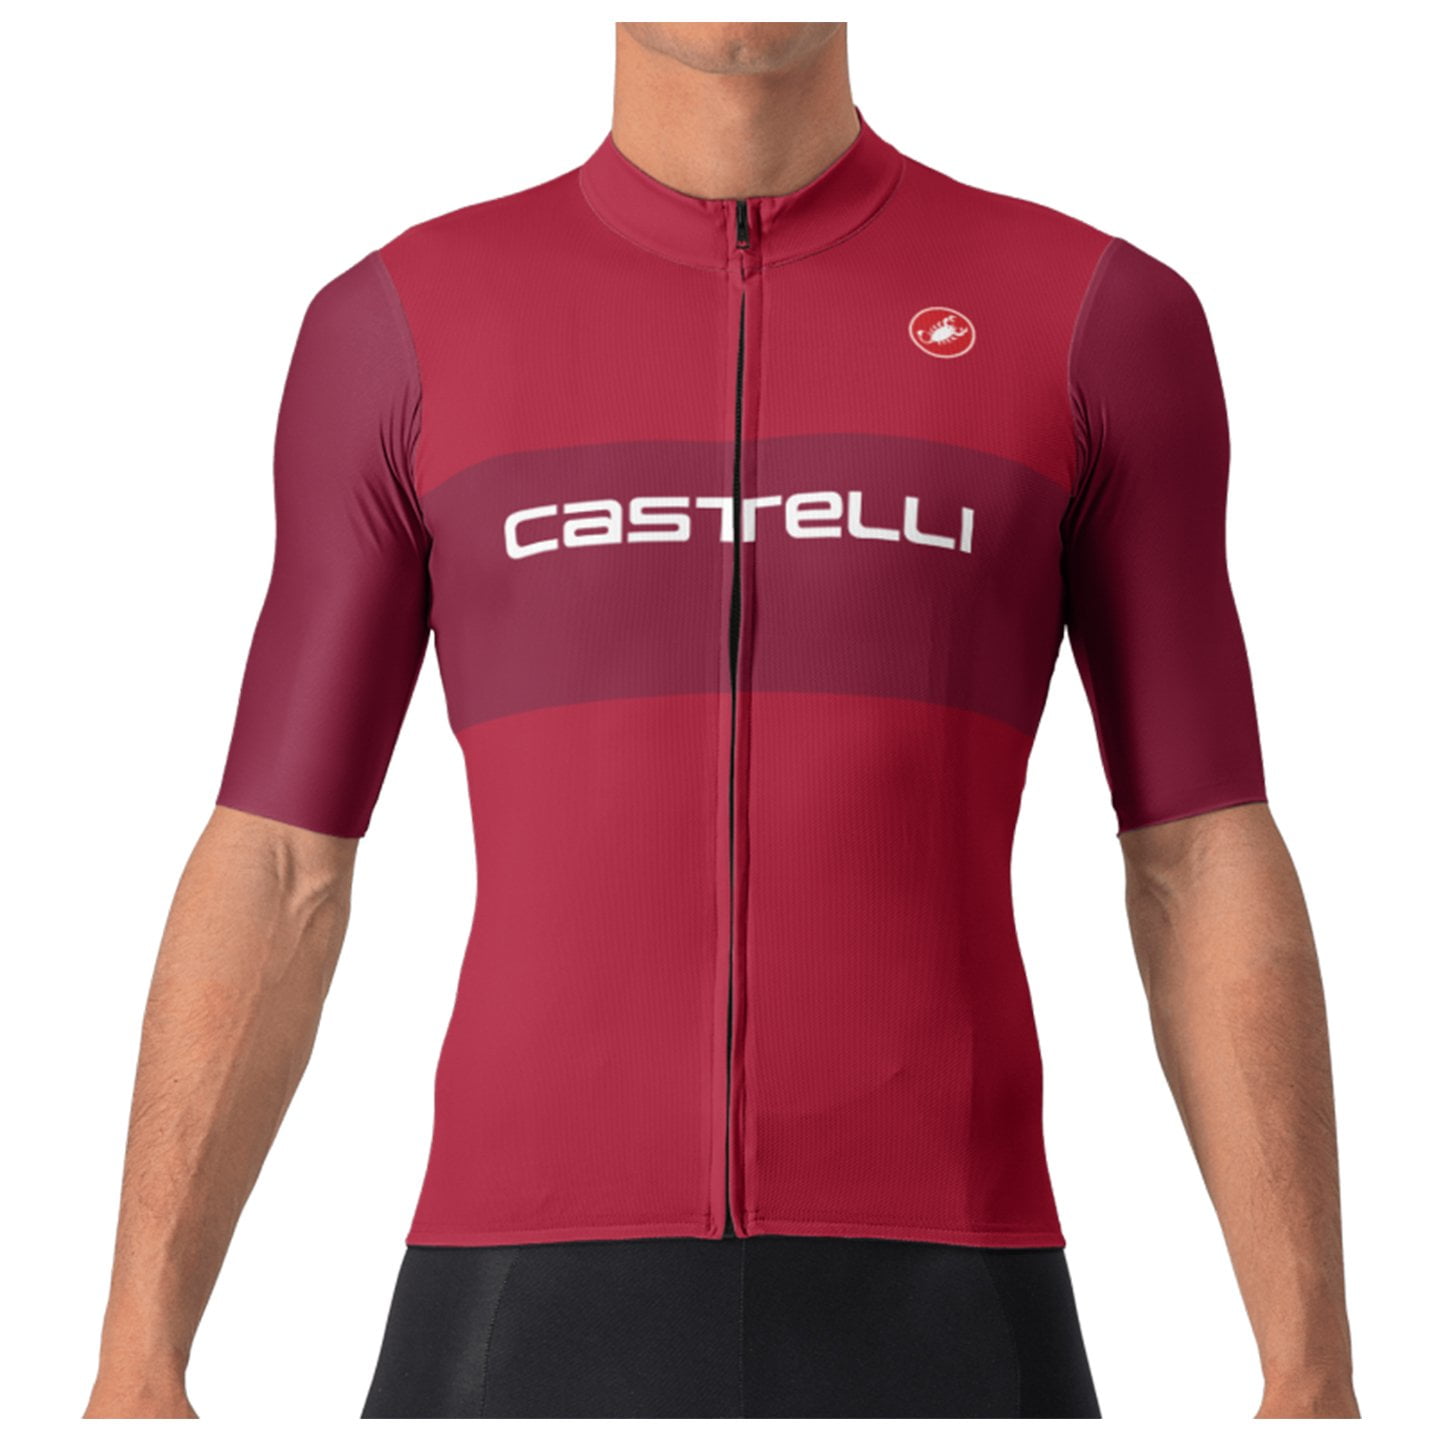 CASTELLI Fan Block Short Sleeve Jersey, for men, size 3XL, Cycling jersey, Cycle clothing